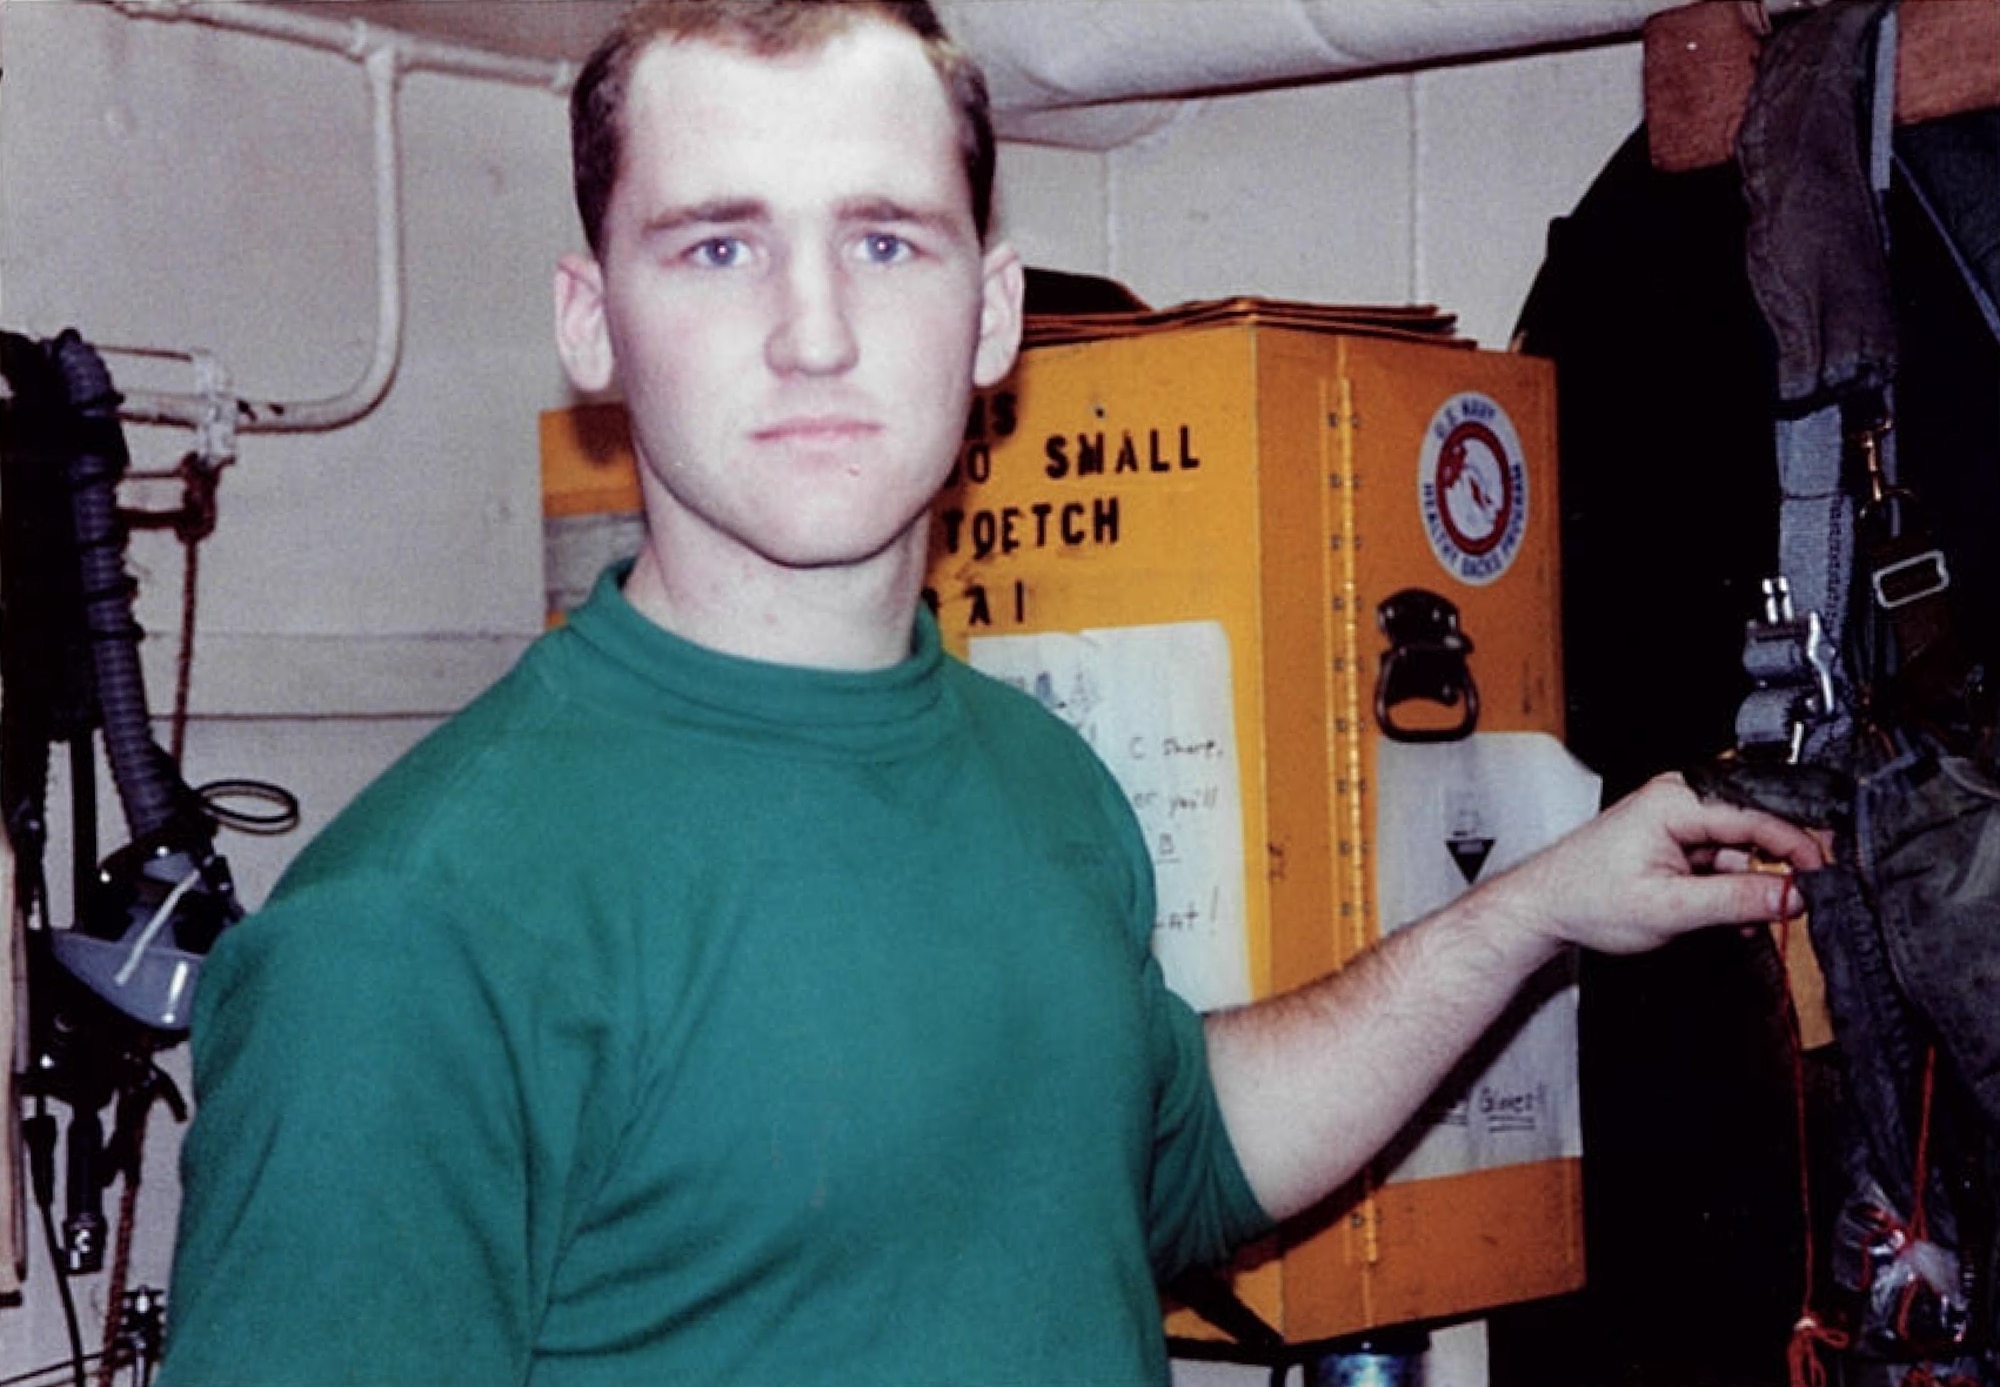 In 1991, then U.S. Navy Petty Officer 2nd Class Ronald Patton was a member of VFA-151, stationed at Atsugi, Japan, when his unit was notified they were deploying to the Gulf to support Operation Desert Shield. More than 4,500 military members served aboard the USS Midway from November 1990 to March 1991 in support of Operations Desert Shield and Storm. Patton separated from the Navy in 1992 and joined the Air Force Reserve’s 403rd Wing at Keesler Air Force Base, Mississippi, in 2007. The staff sergeant works in the 403rd Operational Support Squadron as an aircrew flight equipment craftsman. (Courtesy photo)